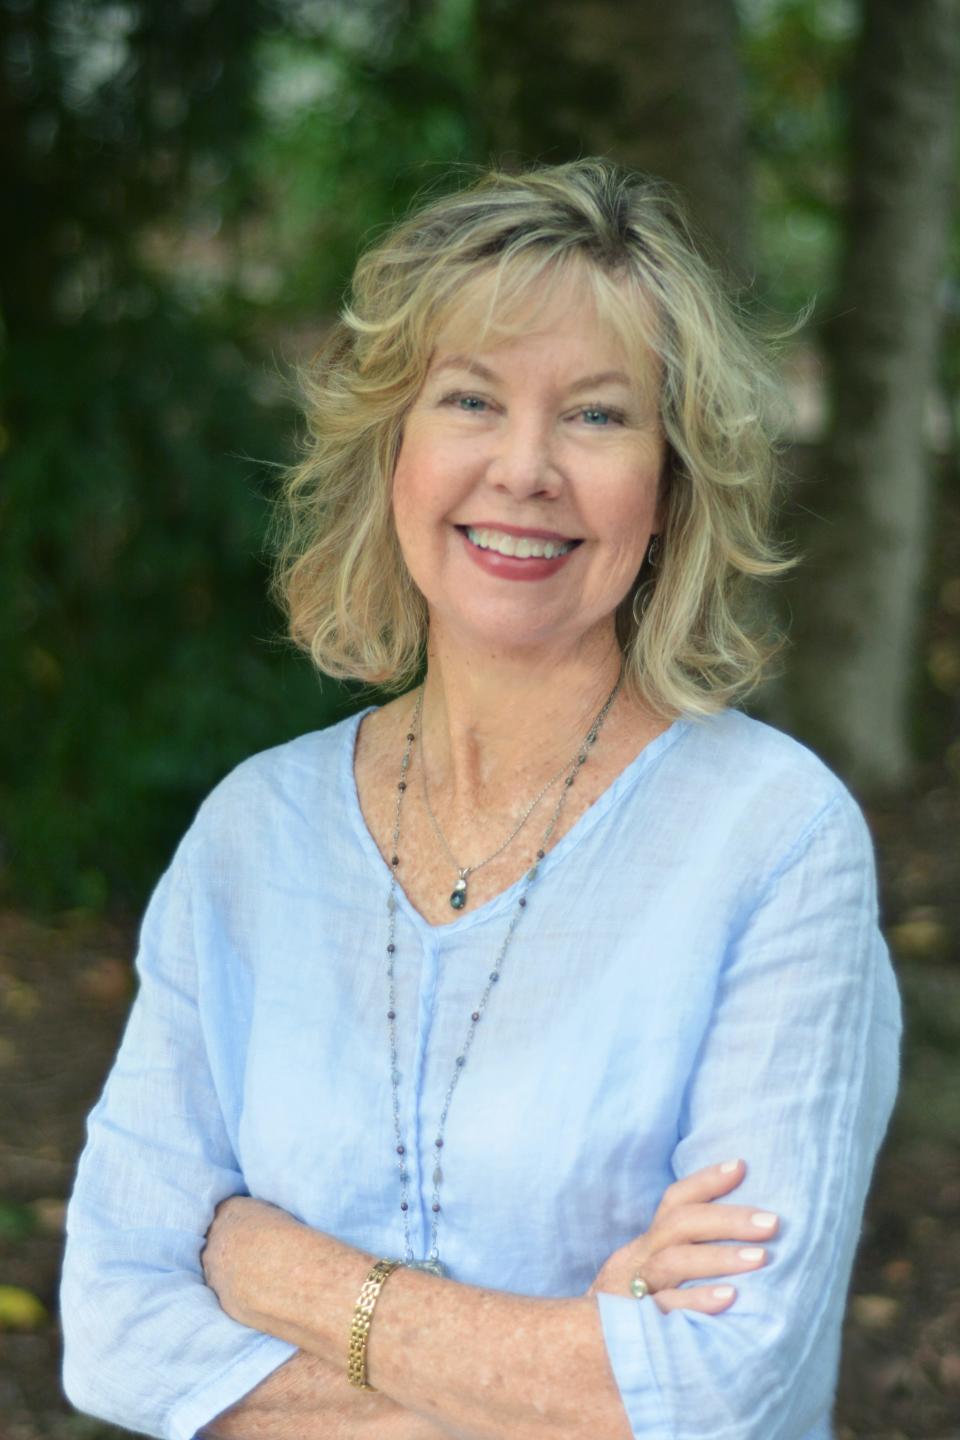 Elaine Neil Orr is an author and a professor of English at N.C. State University in Raleigh. She also teaches in the Spalding University School of Writing.